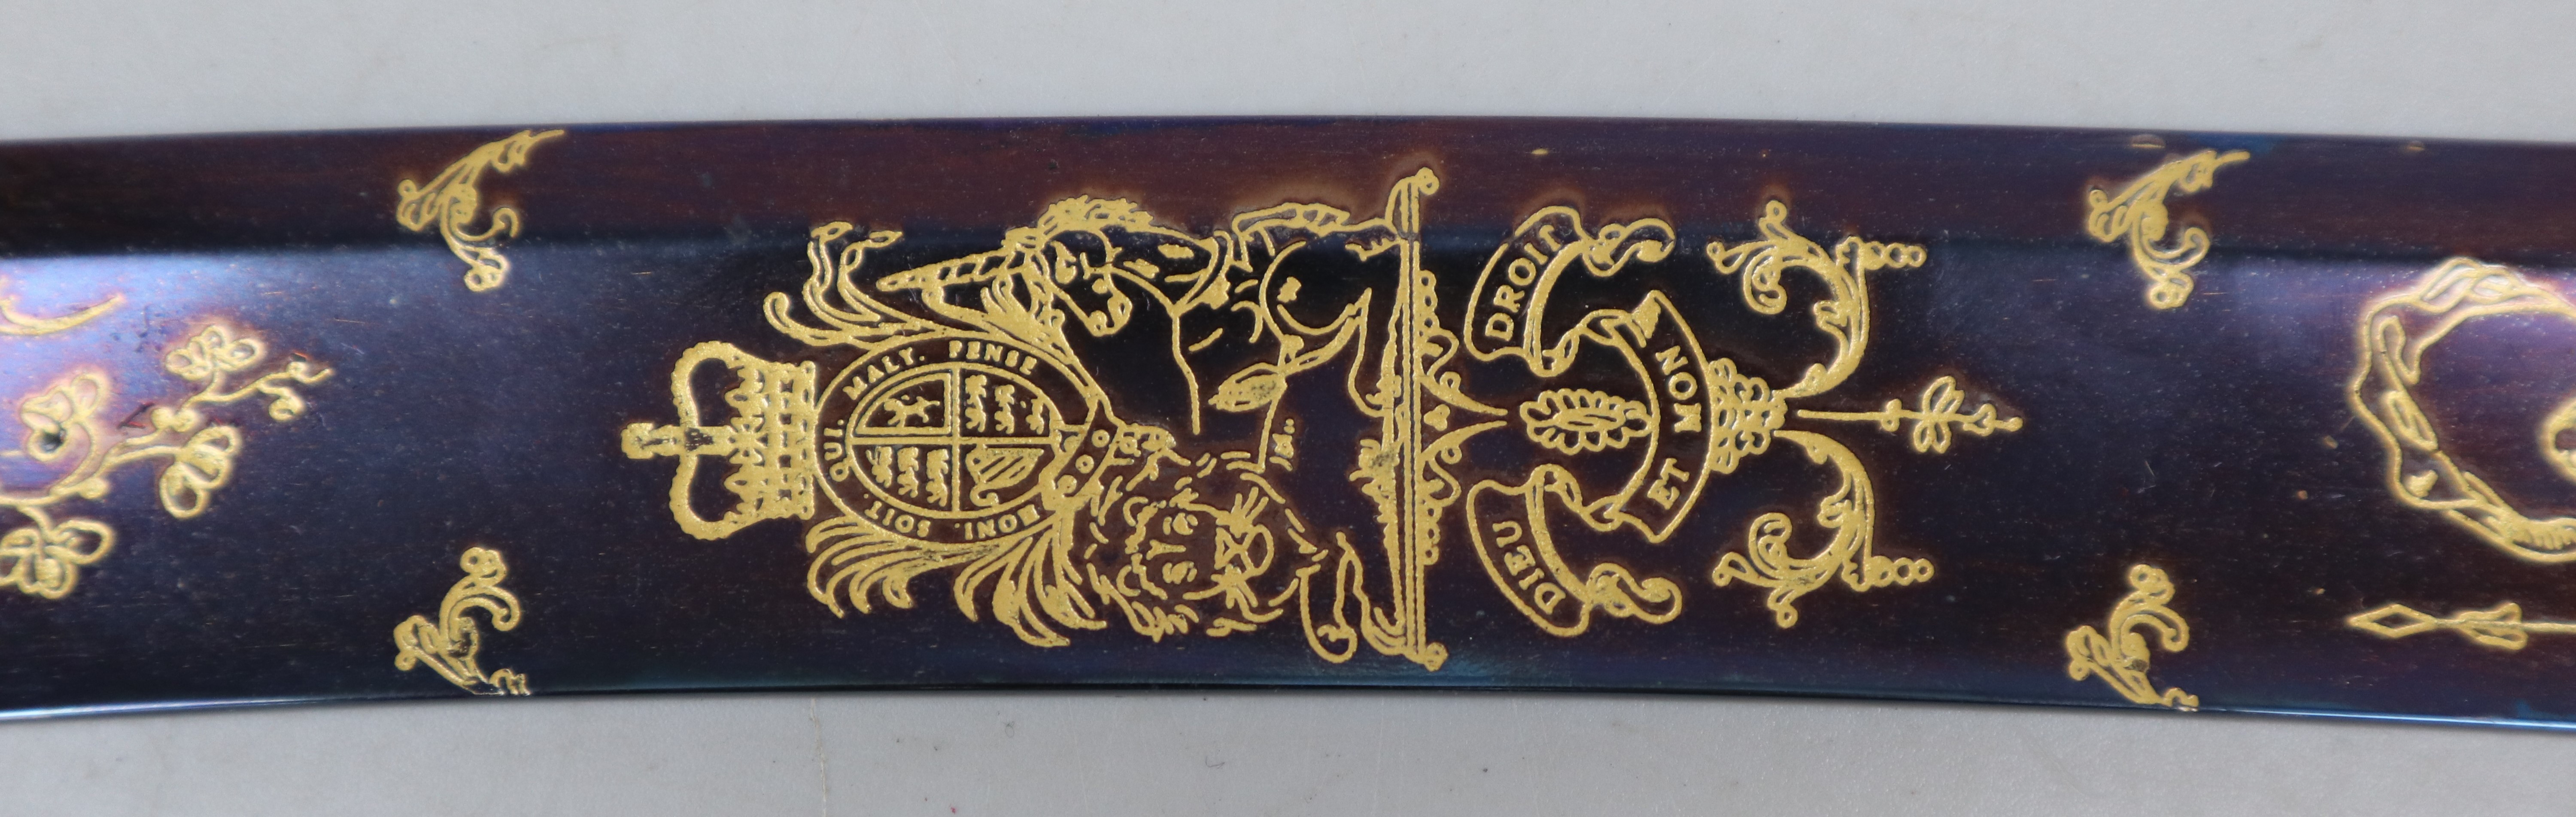 Craig & Co curved and decorated sword blade - Image 4 of 7